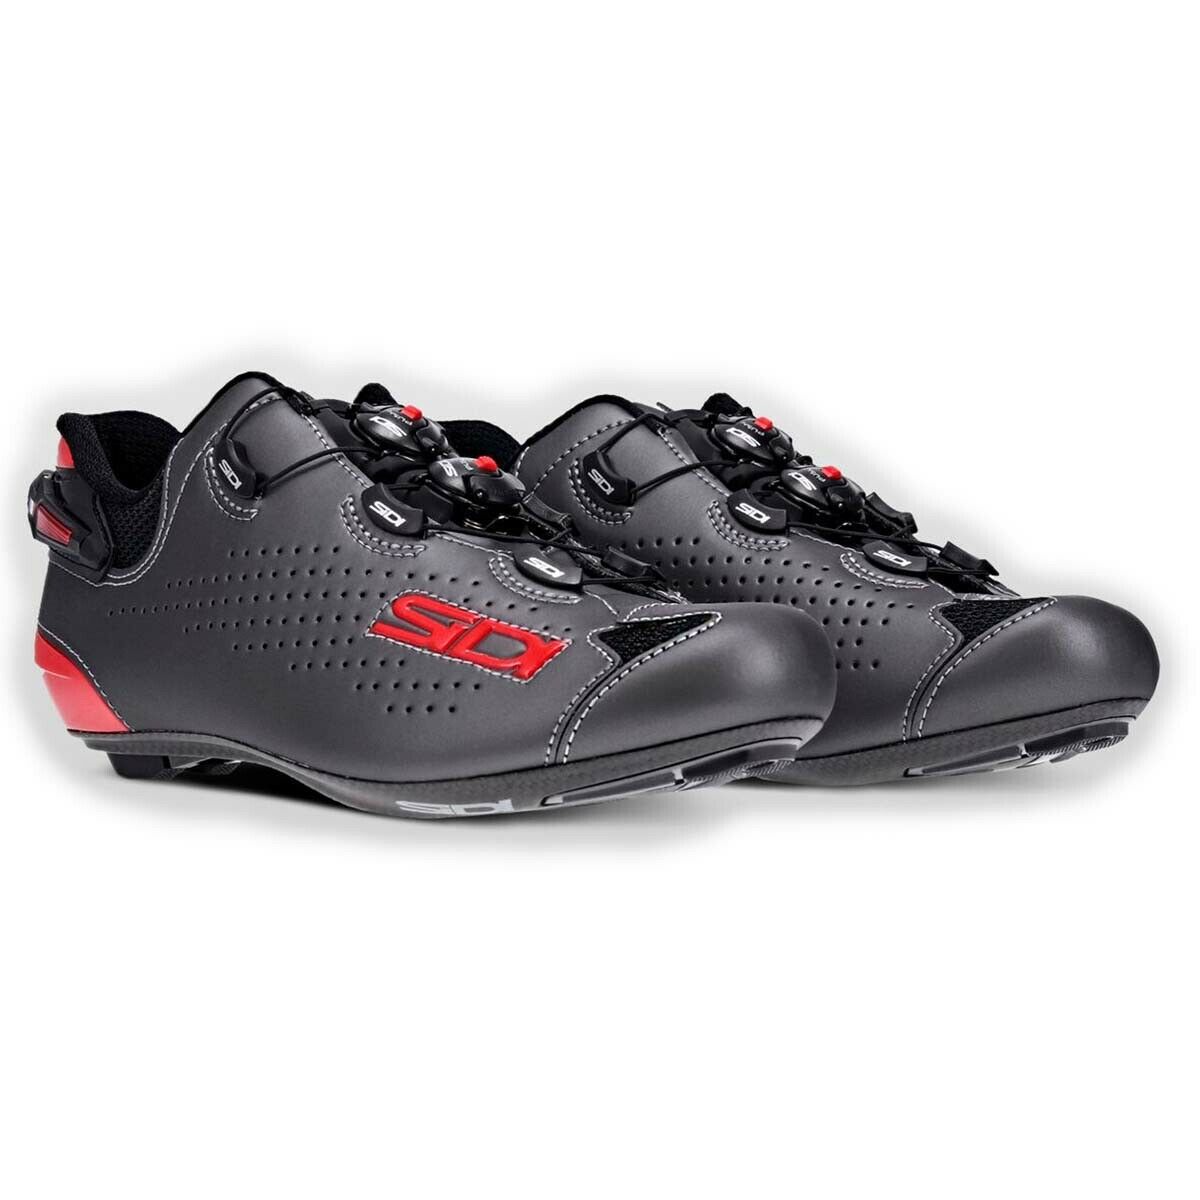 Sidi Shot 2 Limited Edition Shoes CLOSEOUT - Black/Anthracite